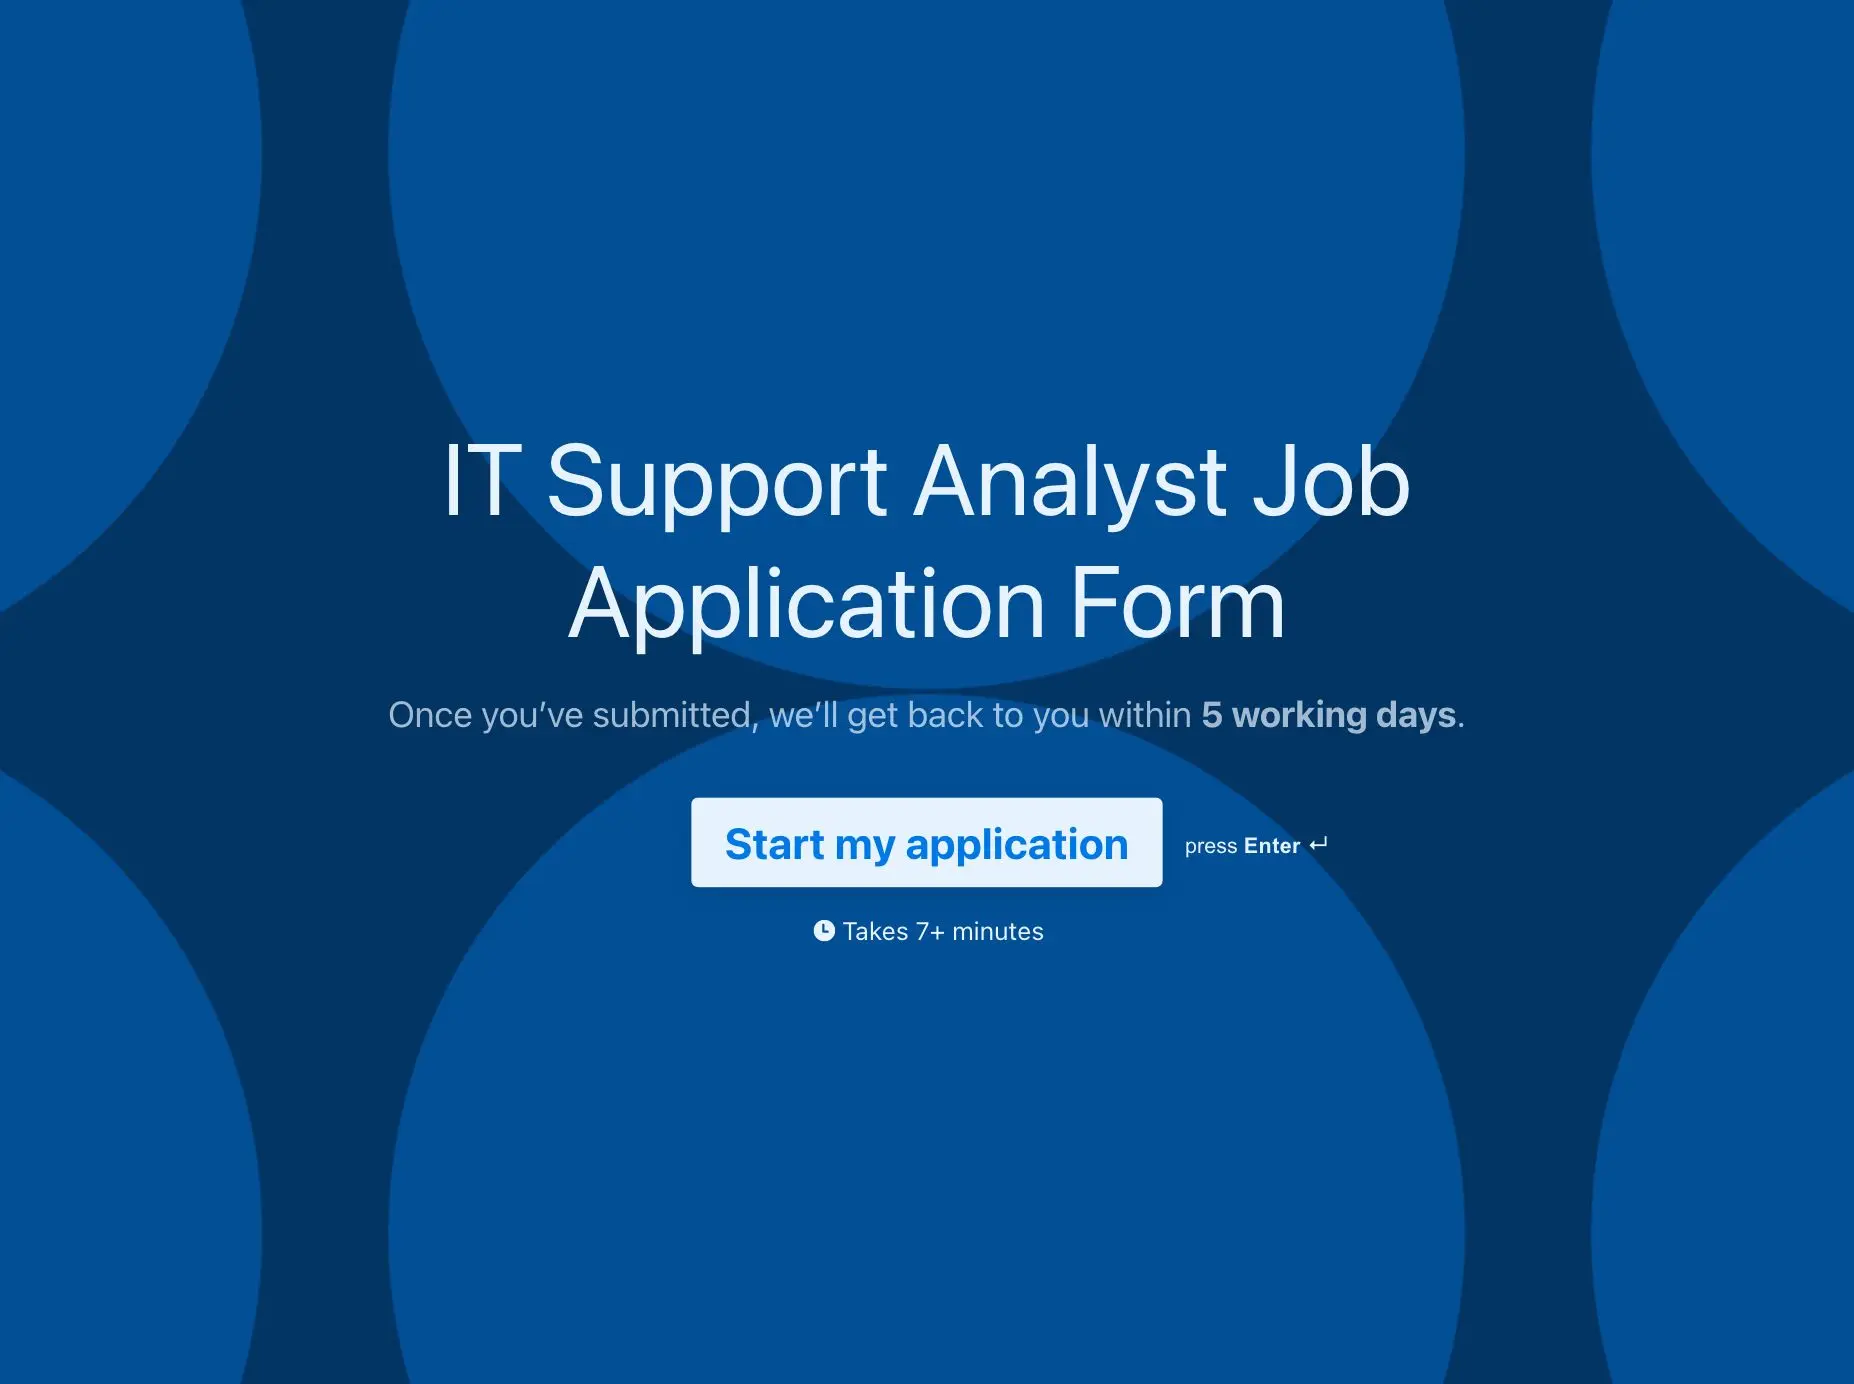 IT Support Analyst Job Application Form Template Hero